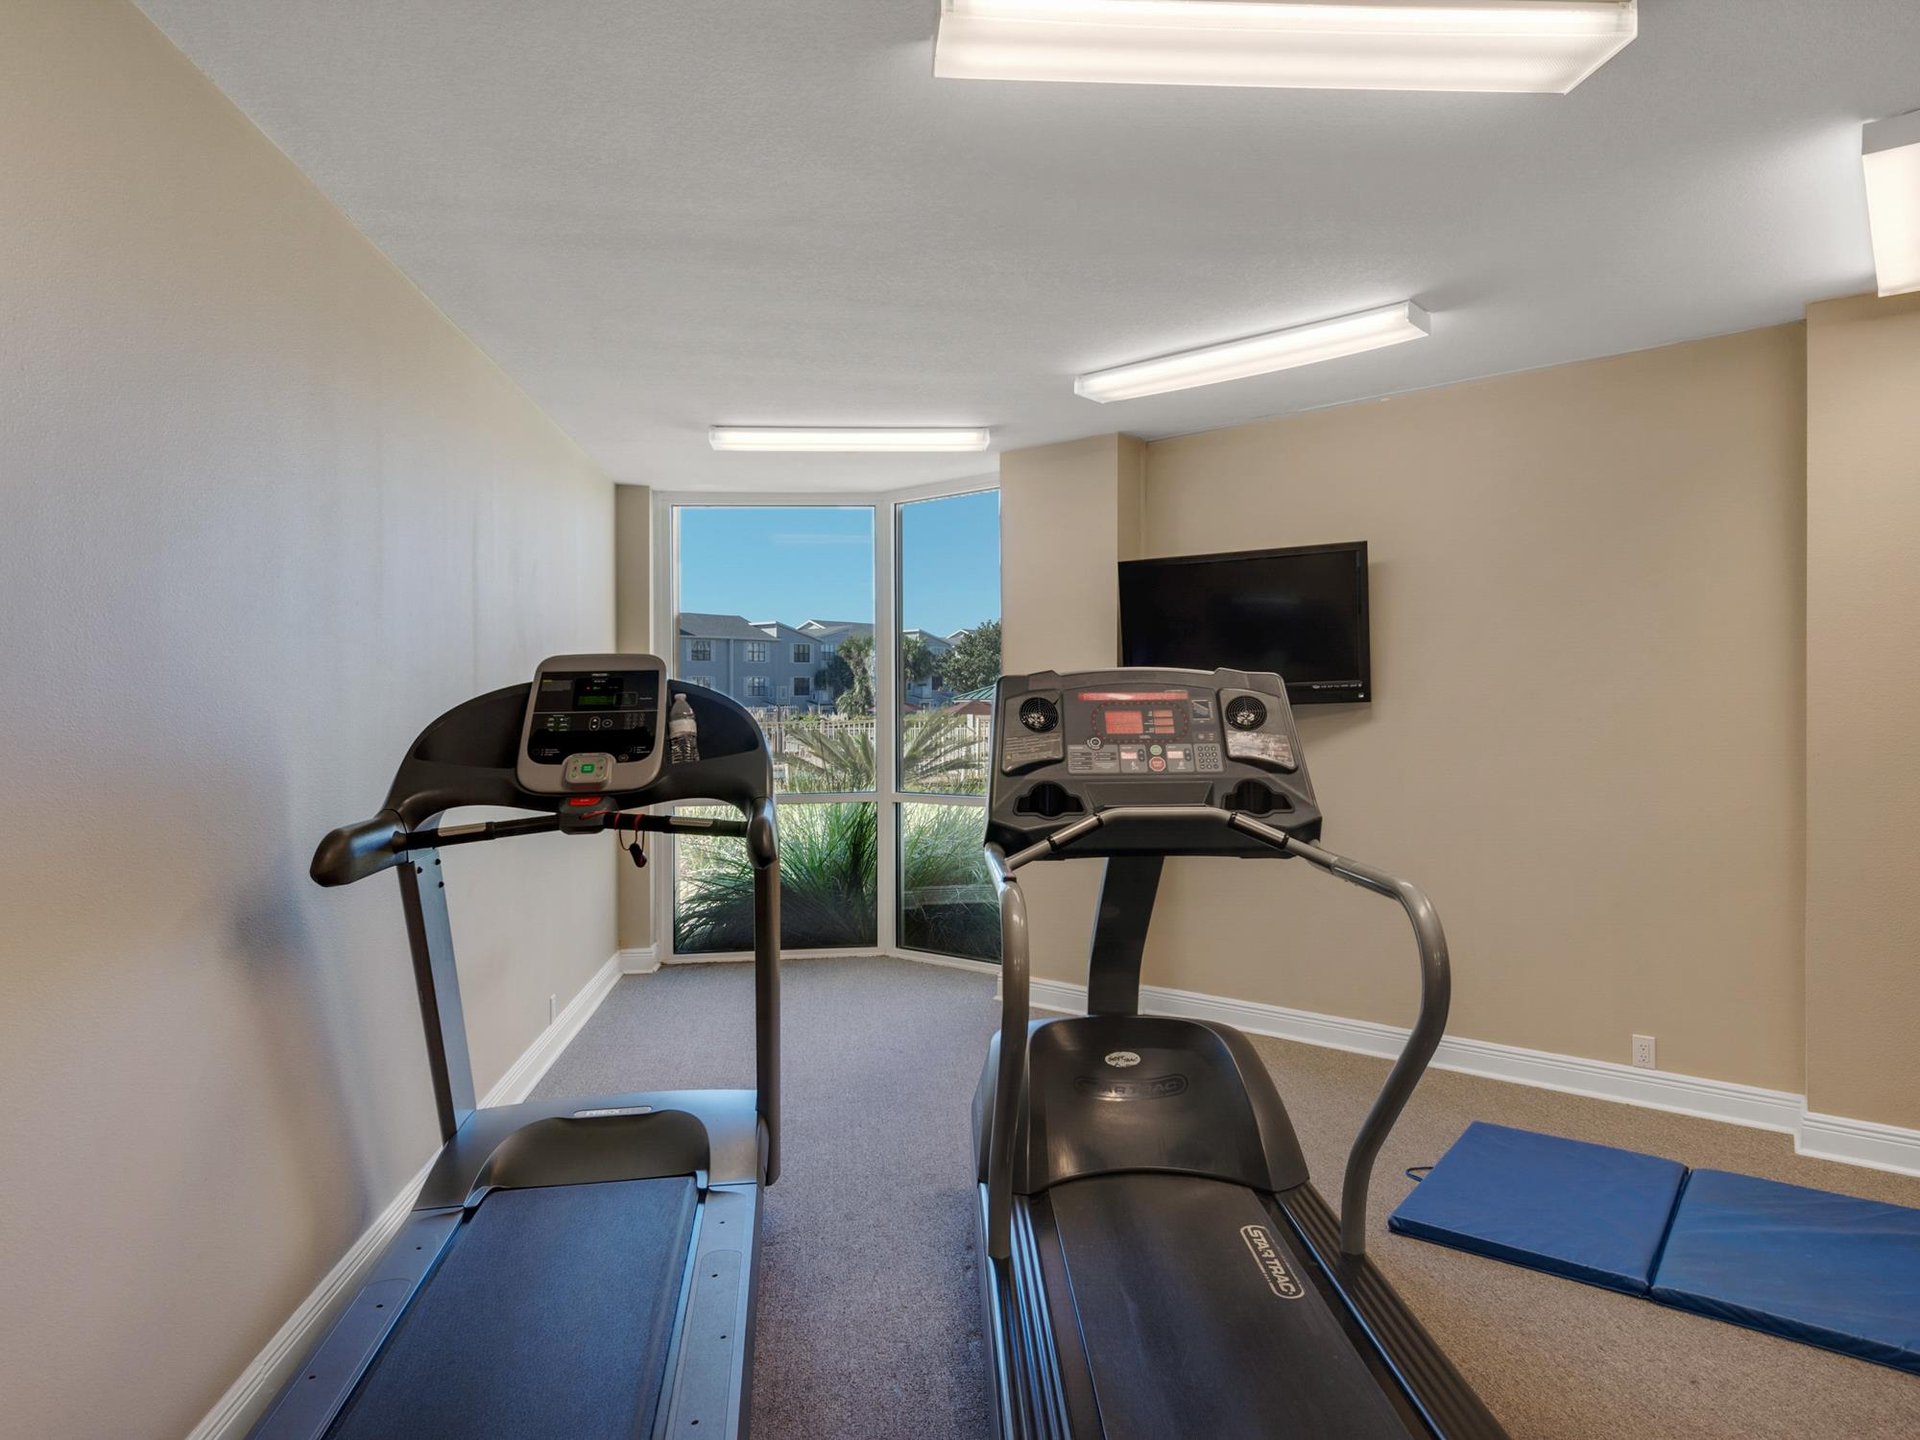 Complext Fitness Room